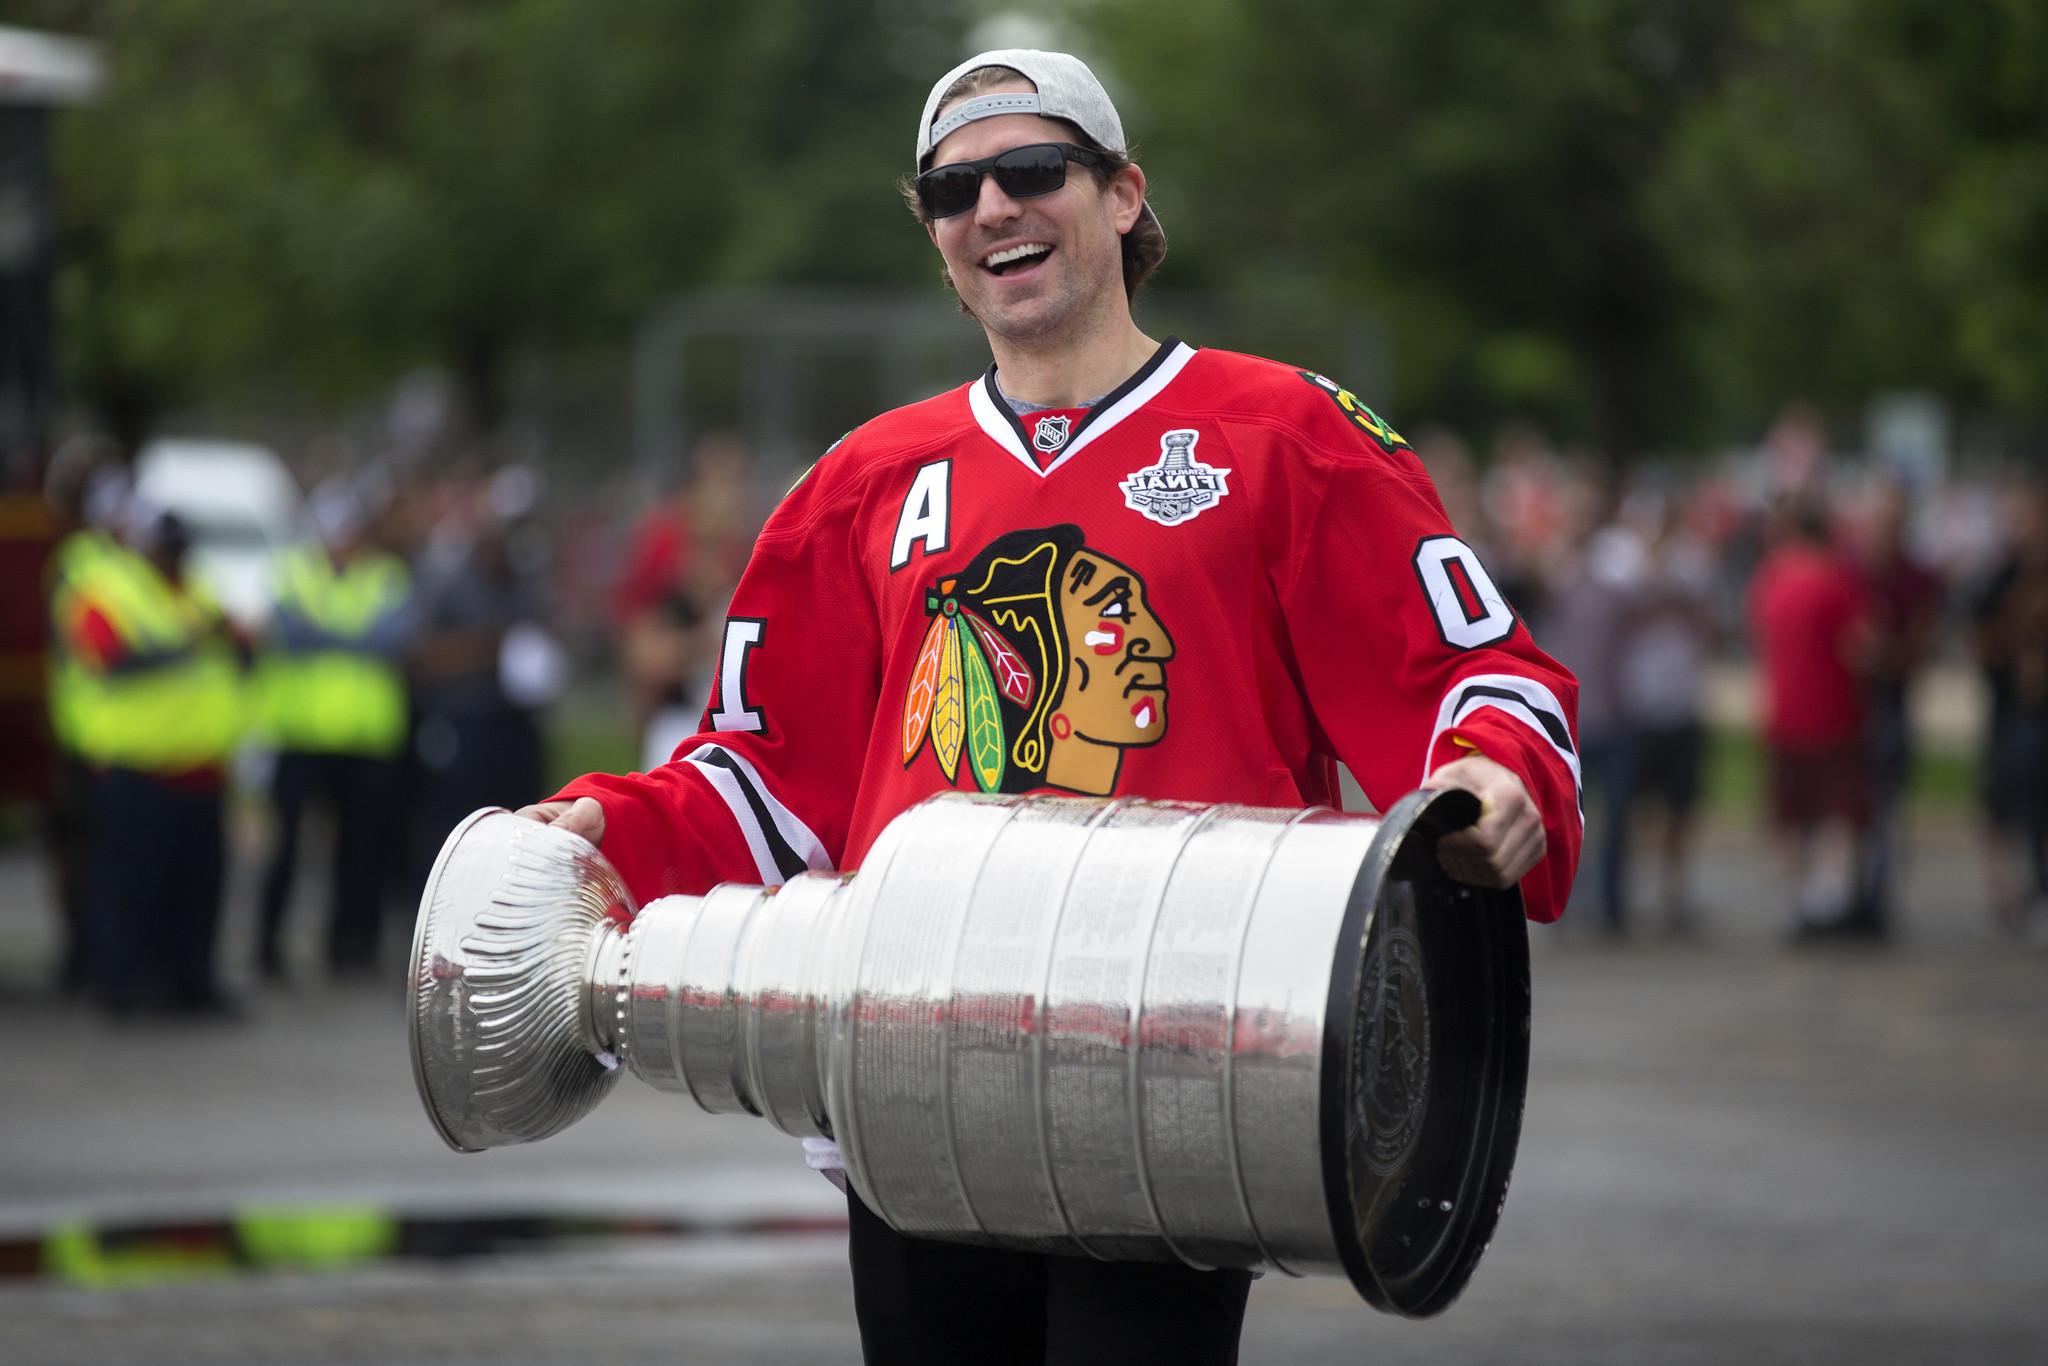 Athlete Patrick Sharp smiling with a gold cup